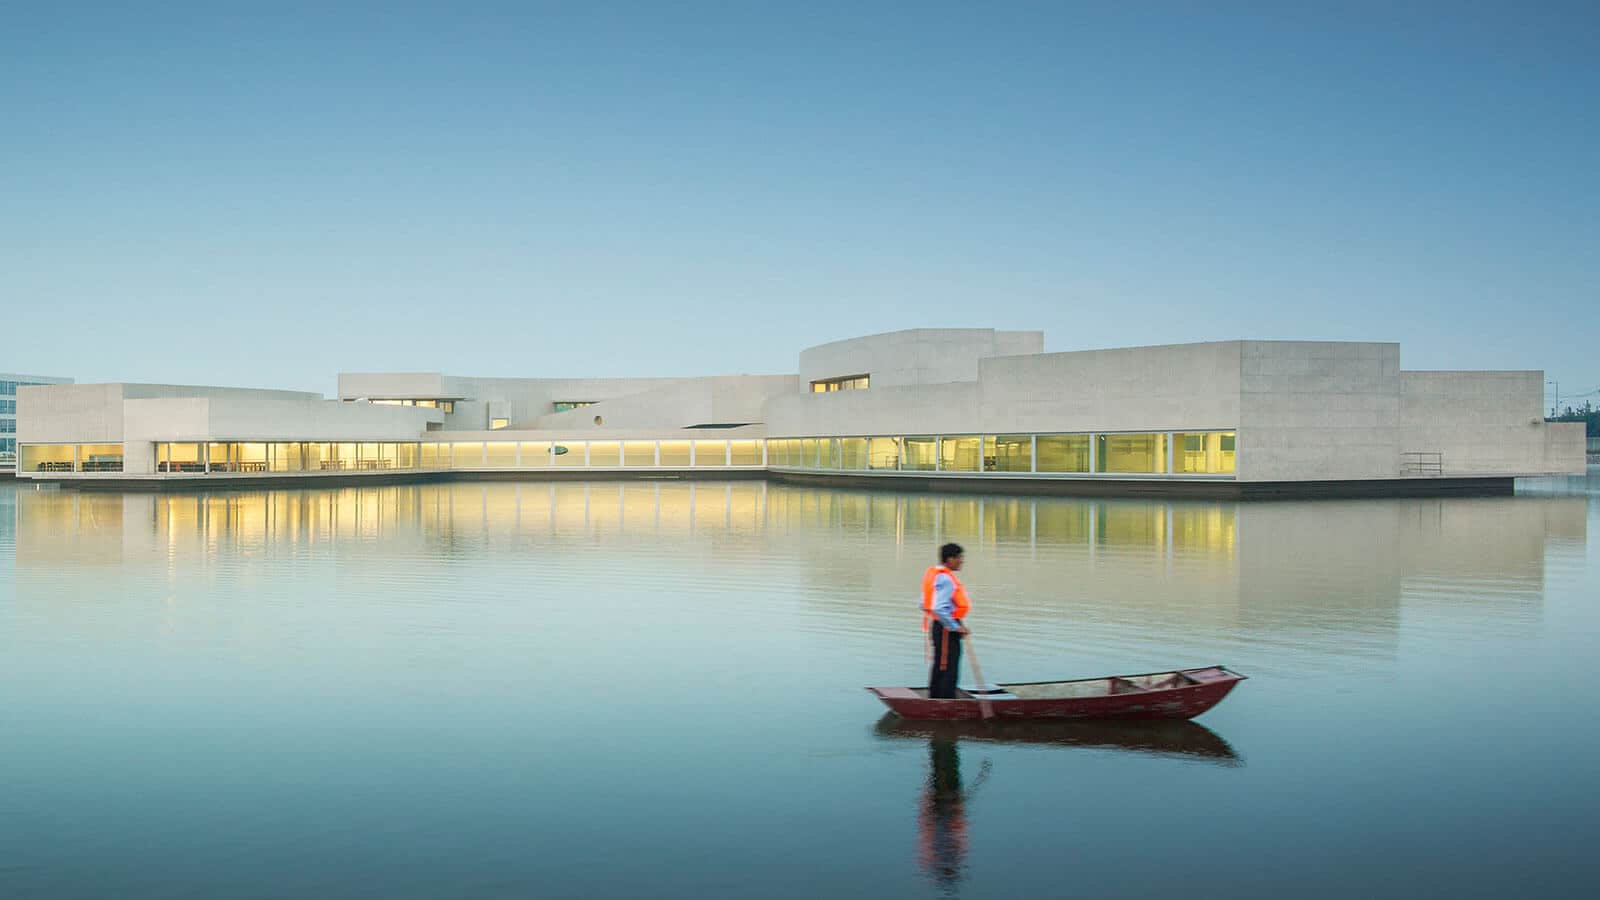 Man in a boat looks at a white concrete building.